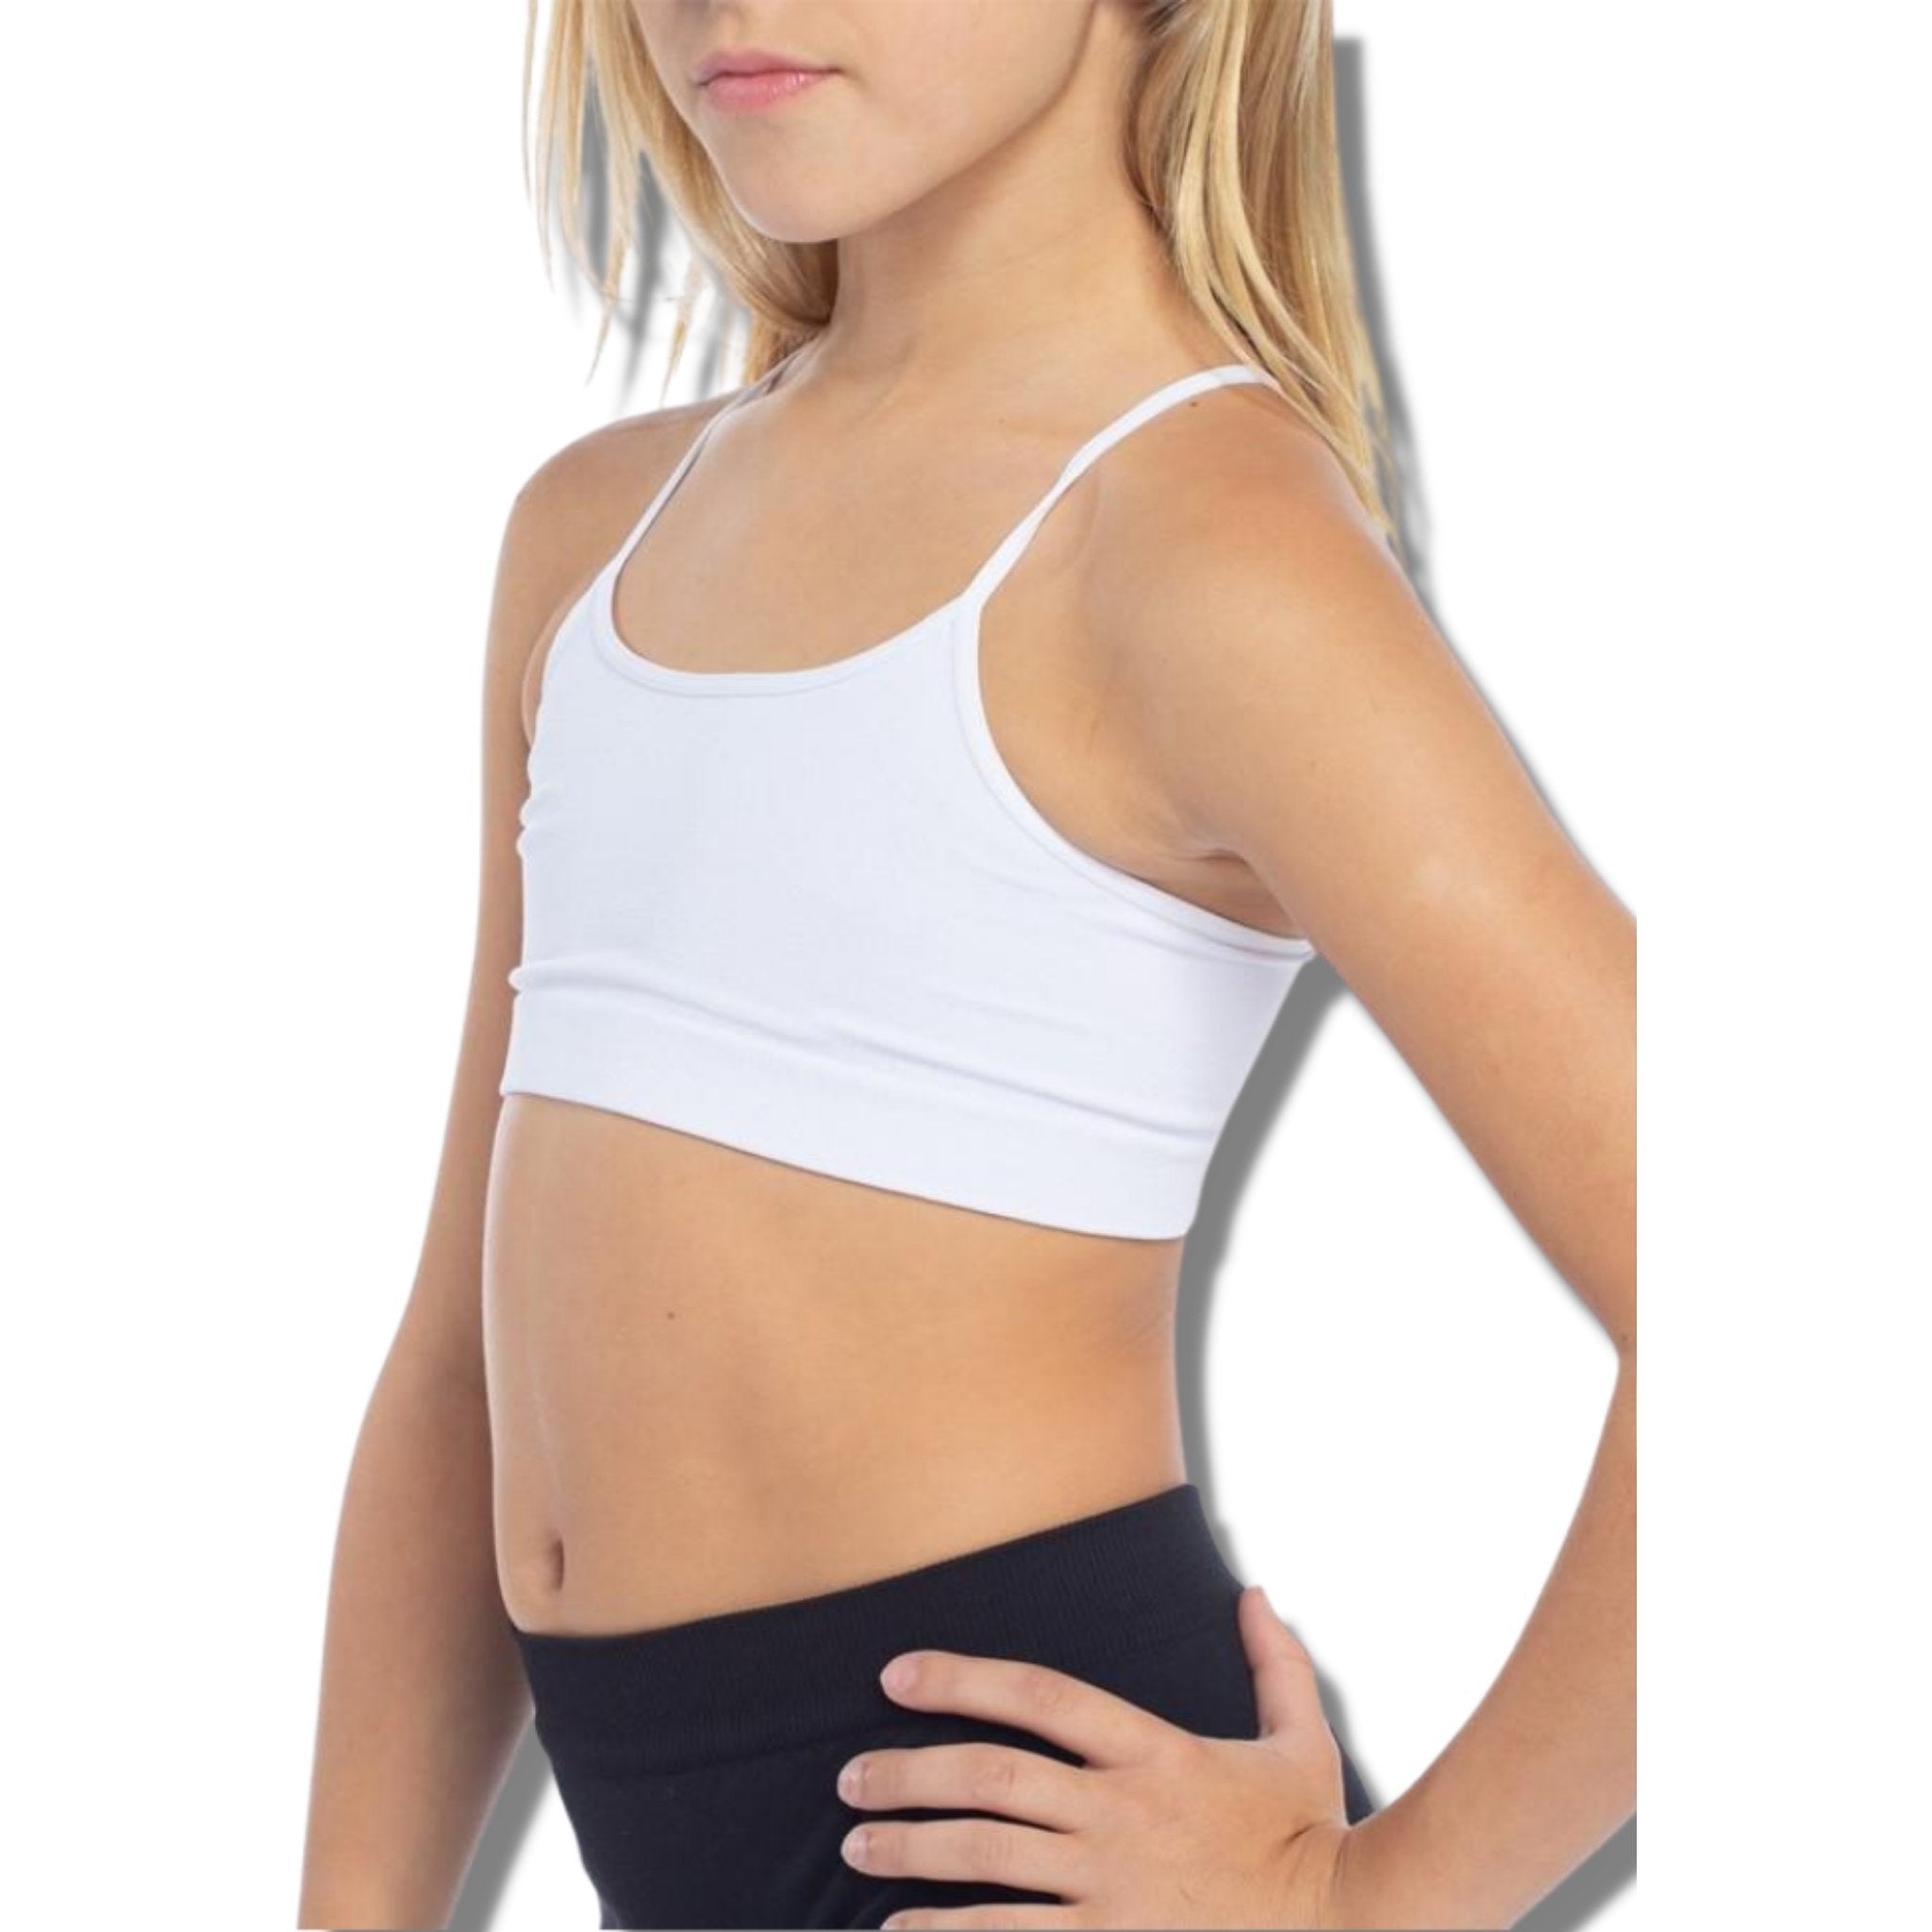 Little Girl Bra Stock Photos and Images - 123RF